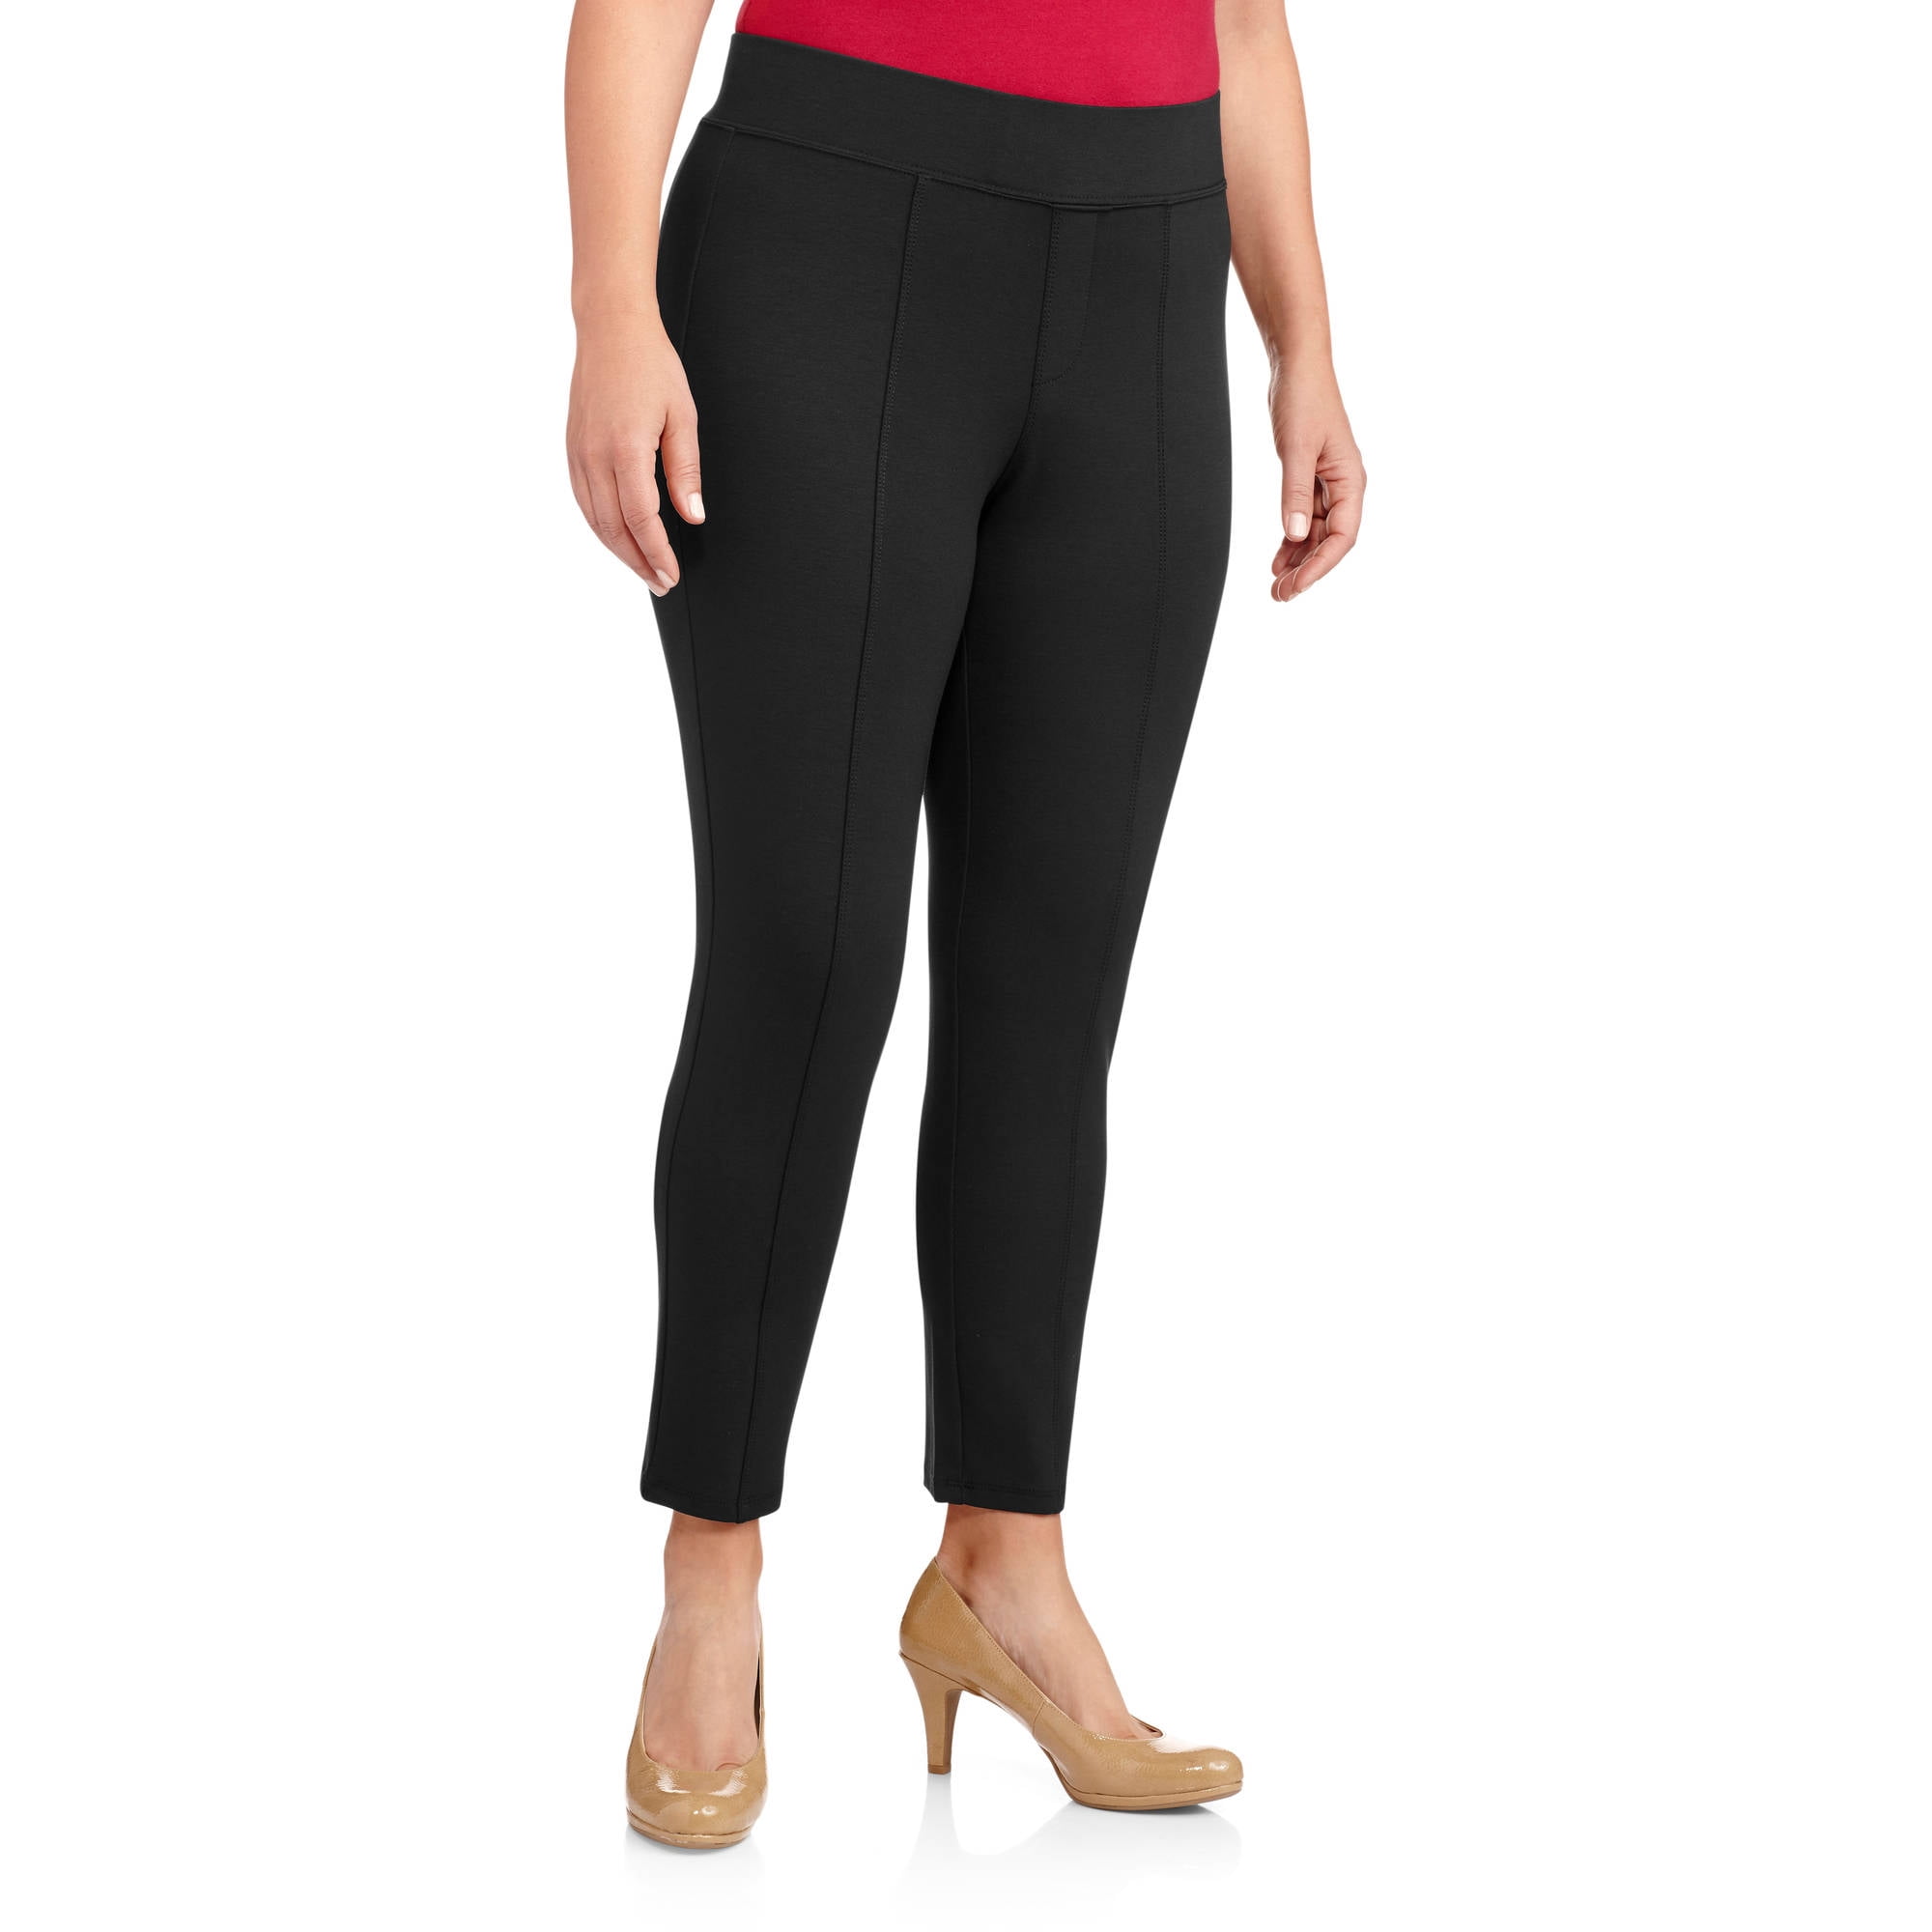 Chic Women's Plus-Size Pull-On Pants, Available in Regular and Petite ...